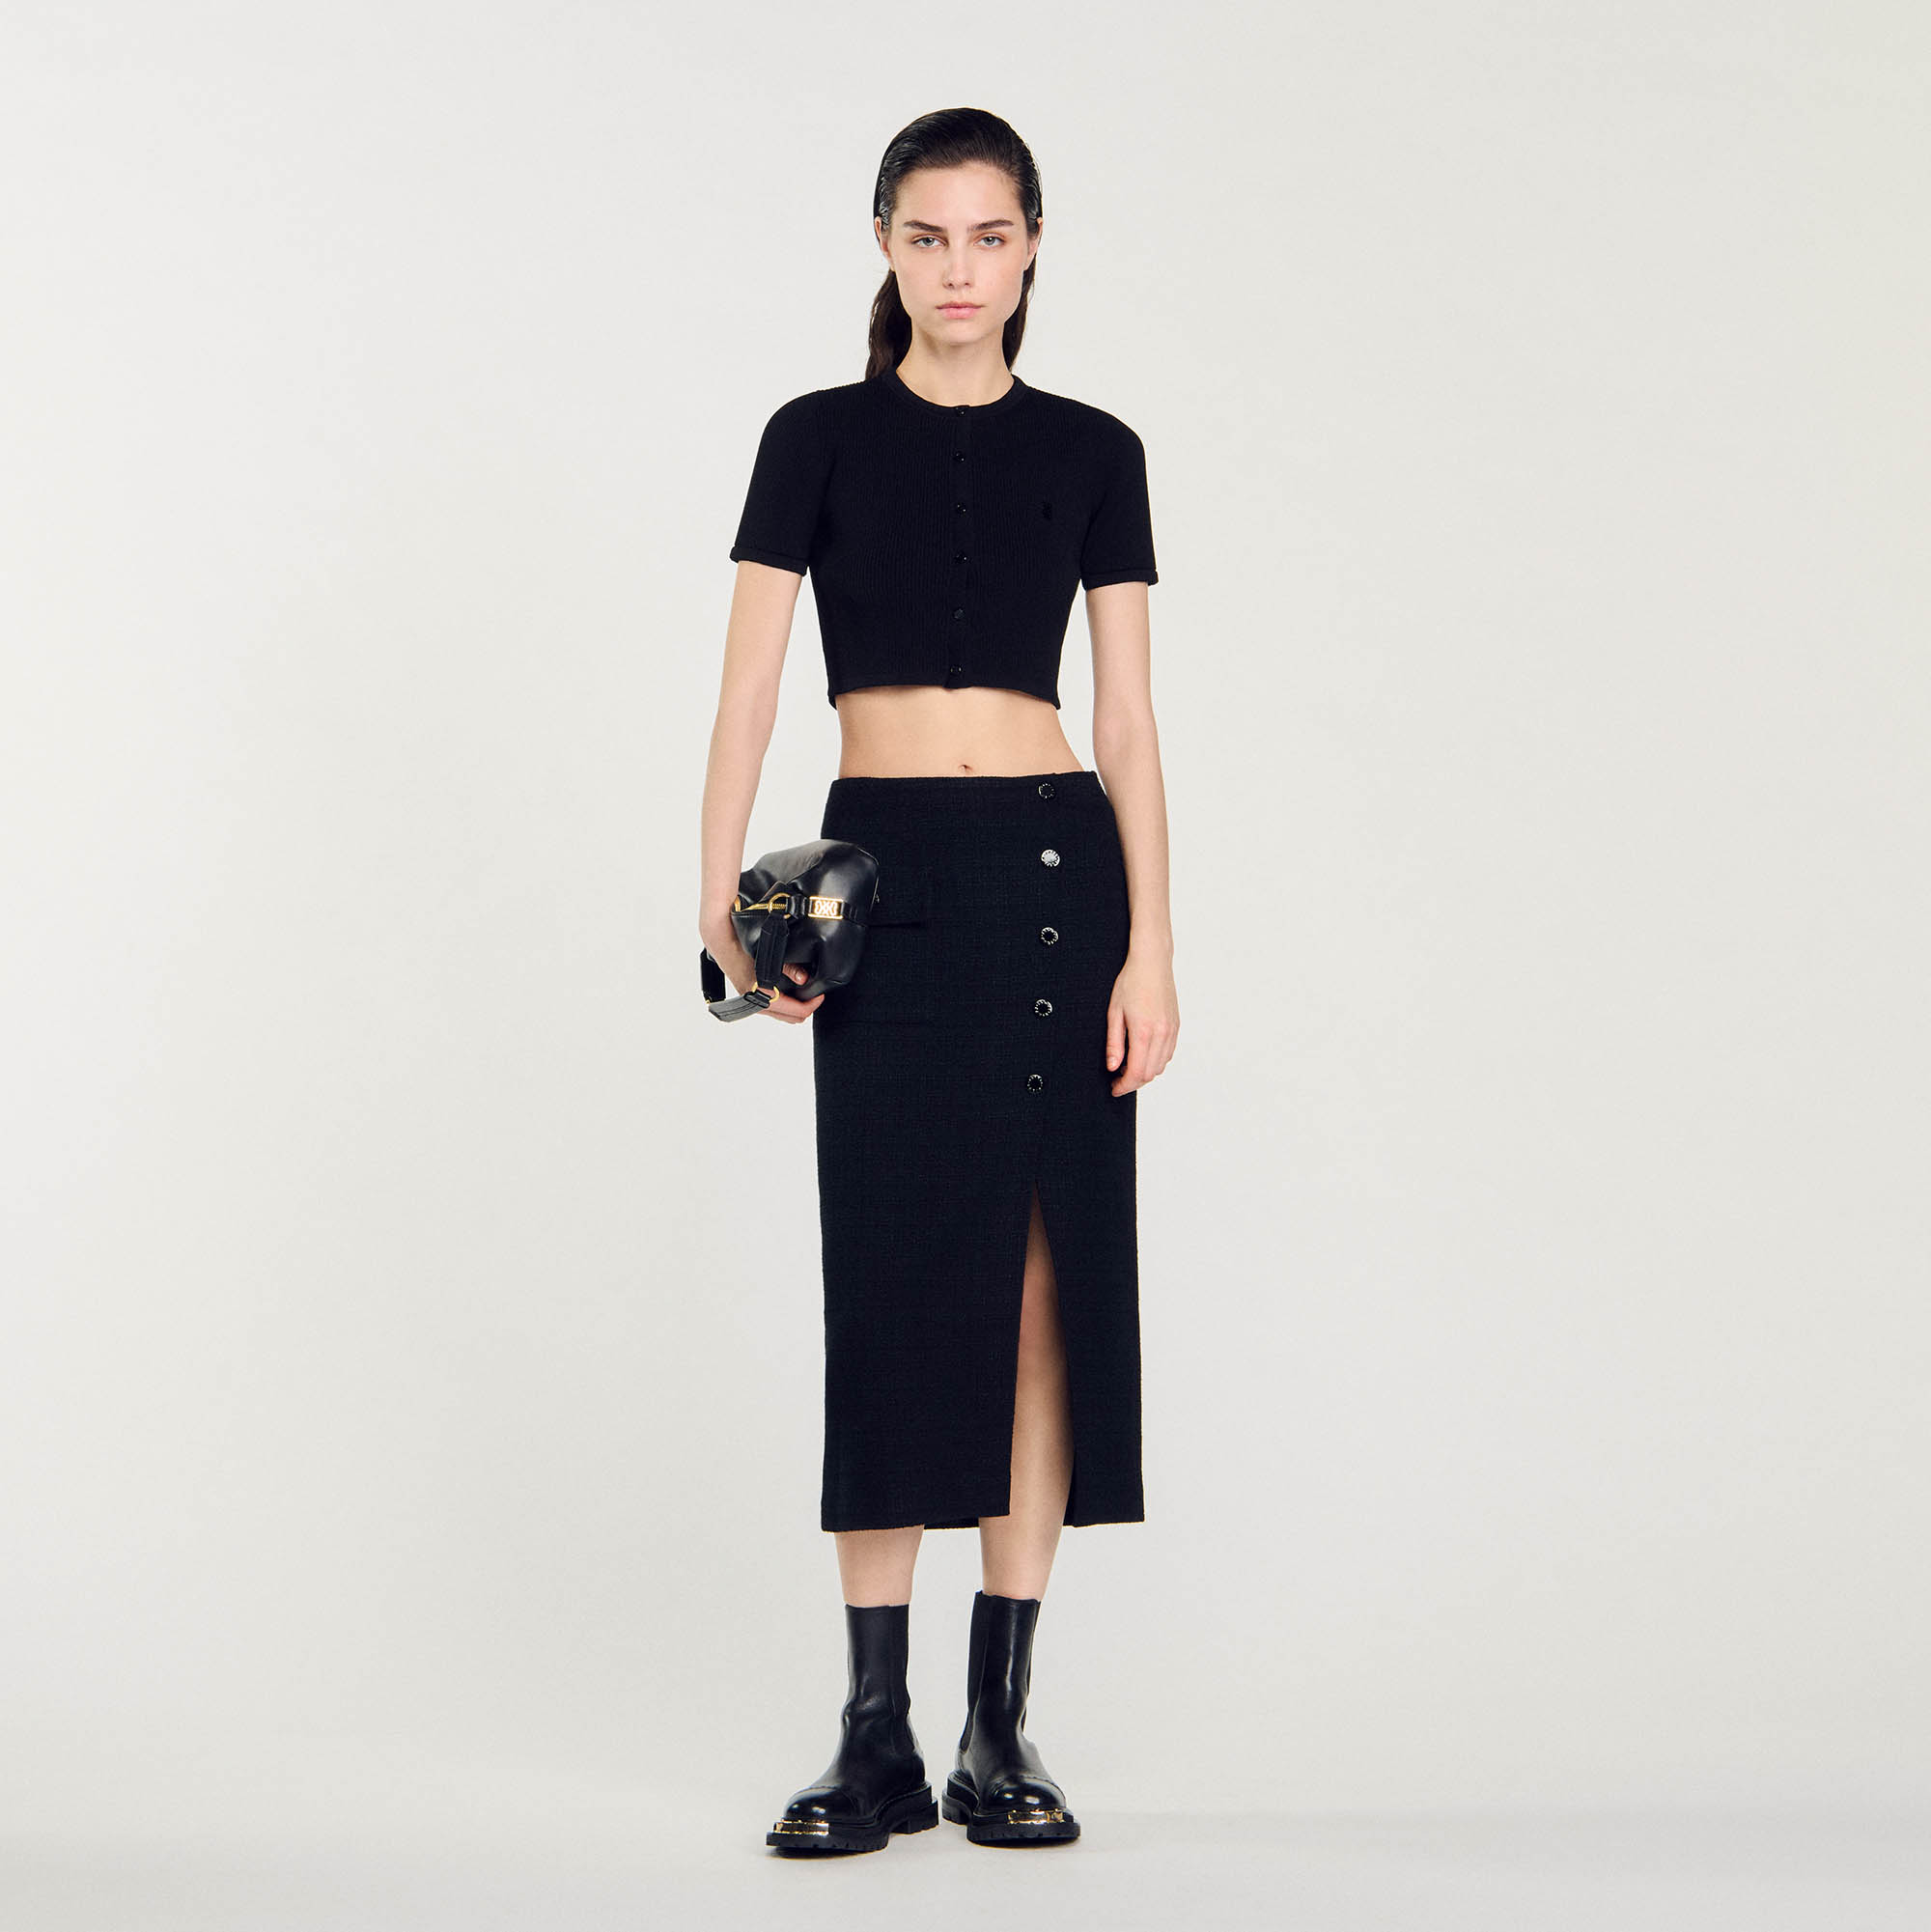 Sandro cotton Tweed midi skirt with a slit in the front, a flap patch pocket on the side, and Sandro-branded snap fasteners